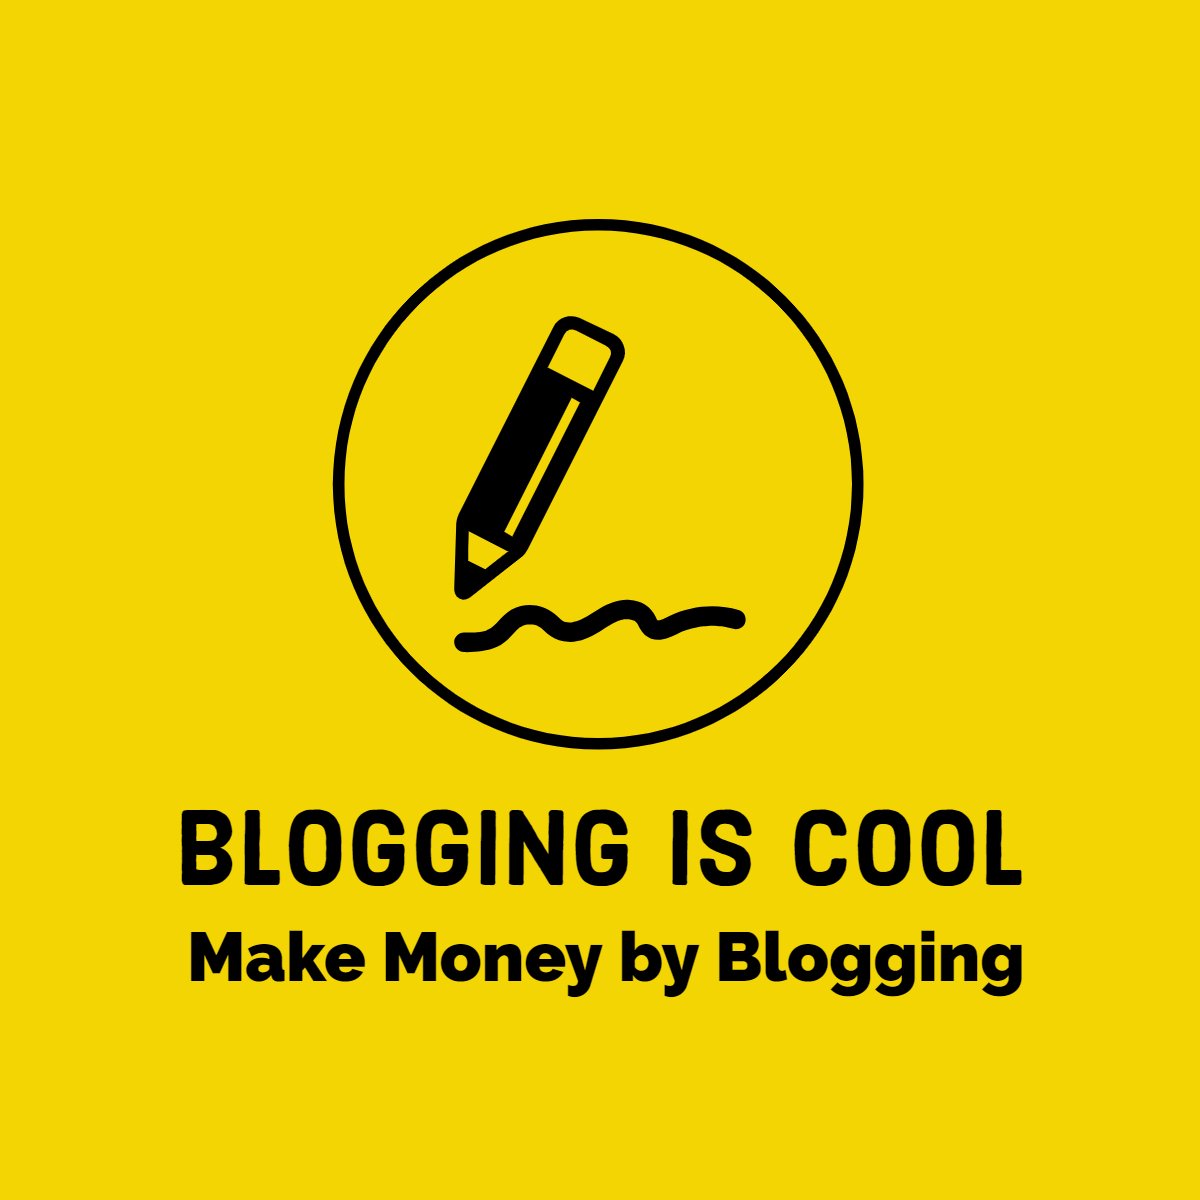 Bloggingiscool.com How to Make Your Blog Profitable and Turn it into a Full-Time Job